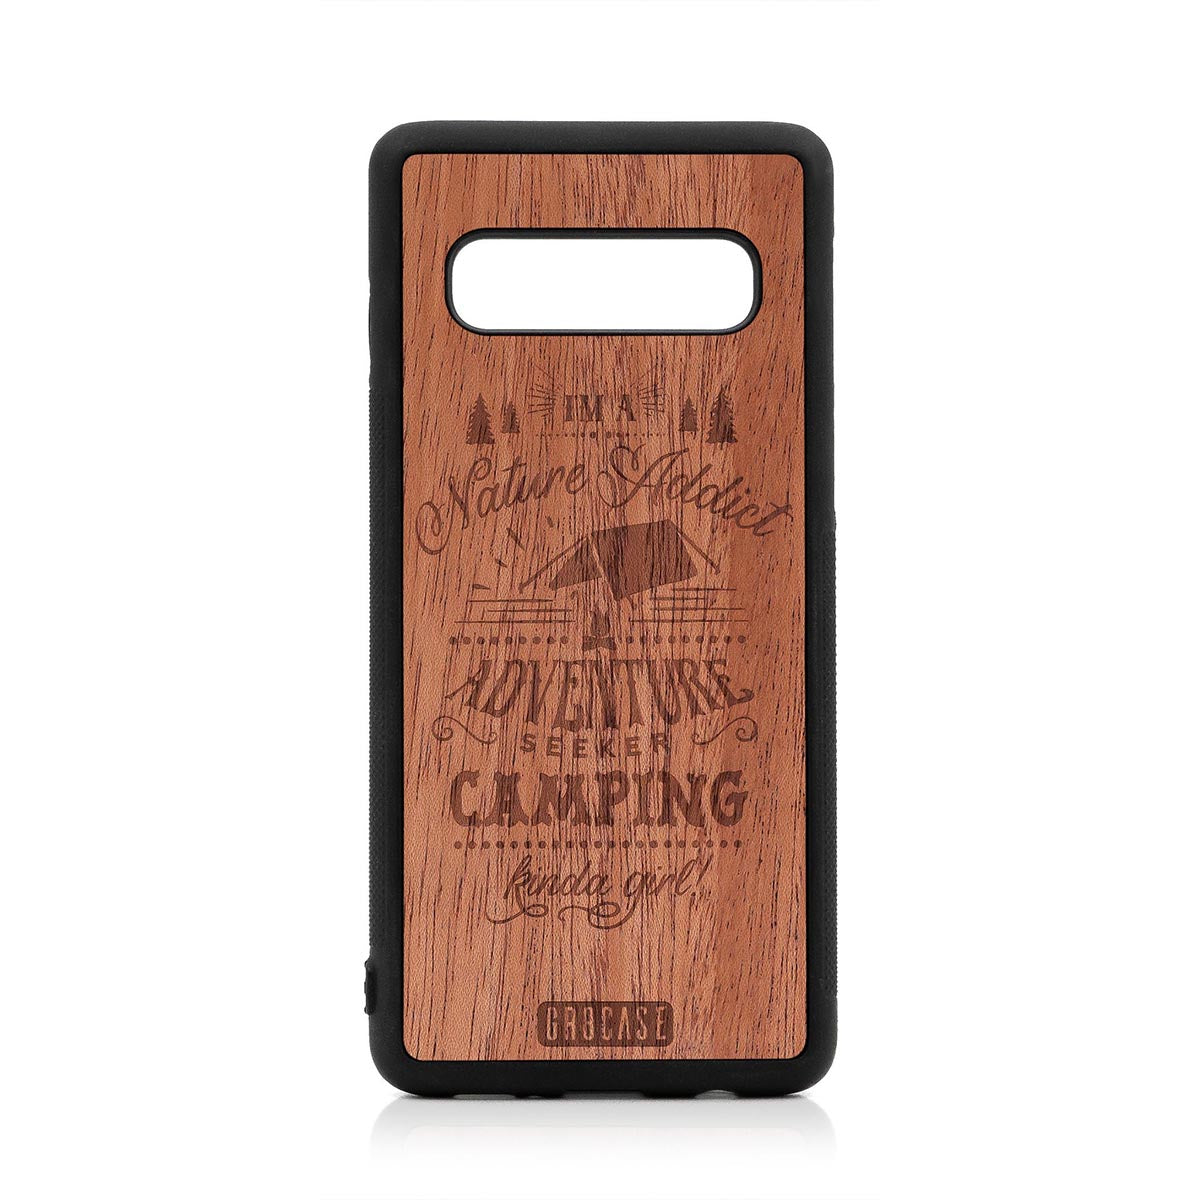 I'm A Nature Addict Adventure Seeker Camping Kinda Girl Design Wood Case For Samsung Galaxy S10 by GR8CASE